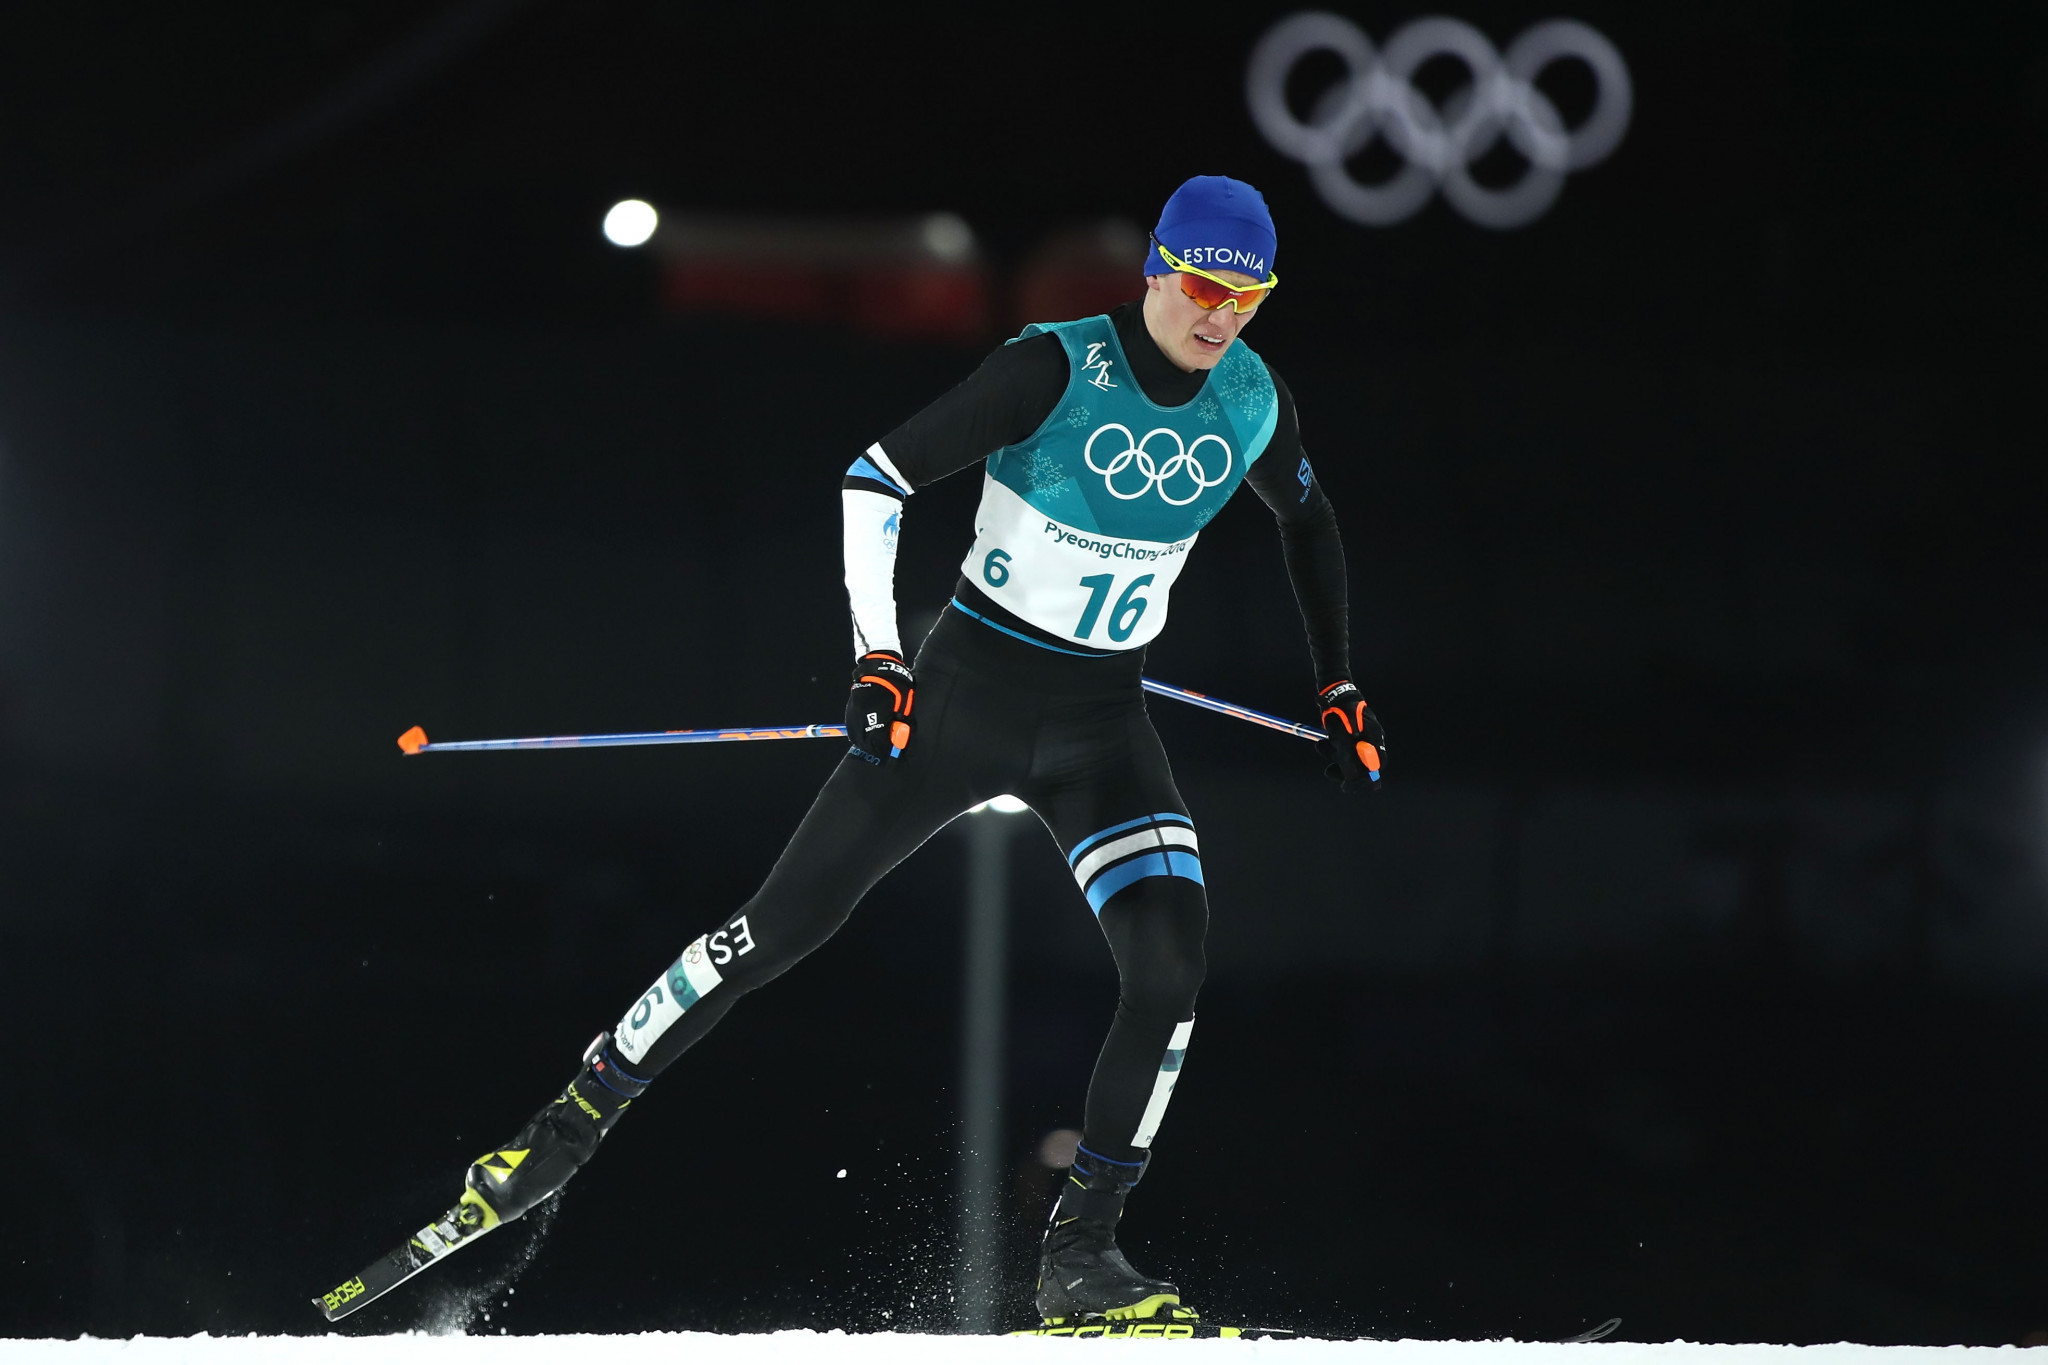 Estonian Ilves to train with Norwegian team before new Nordic combined season